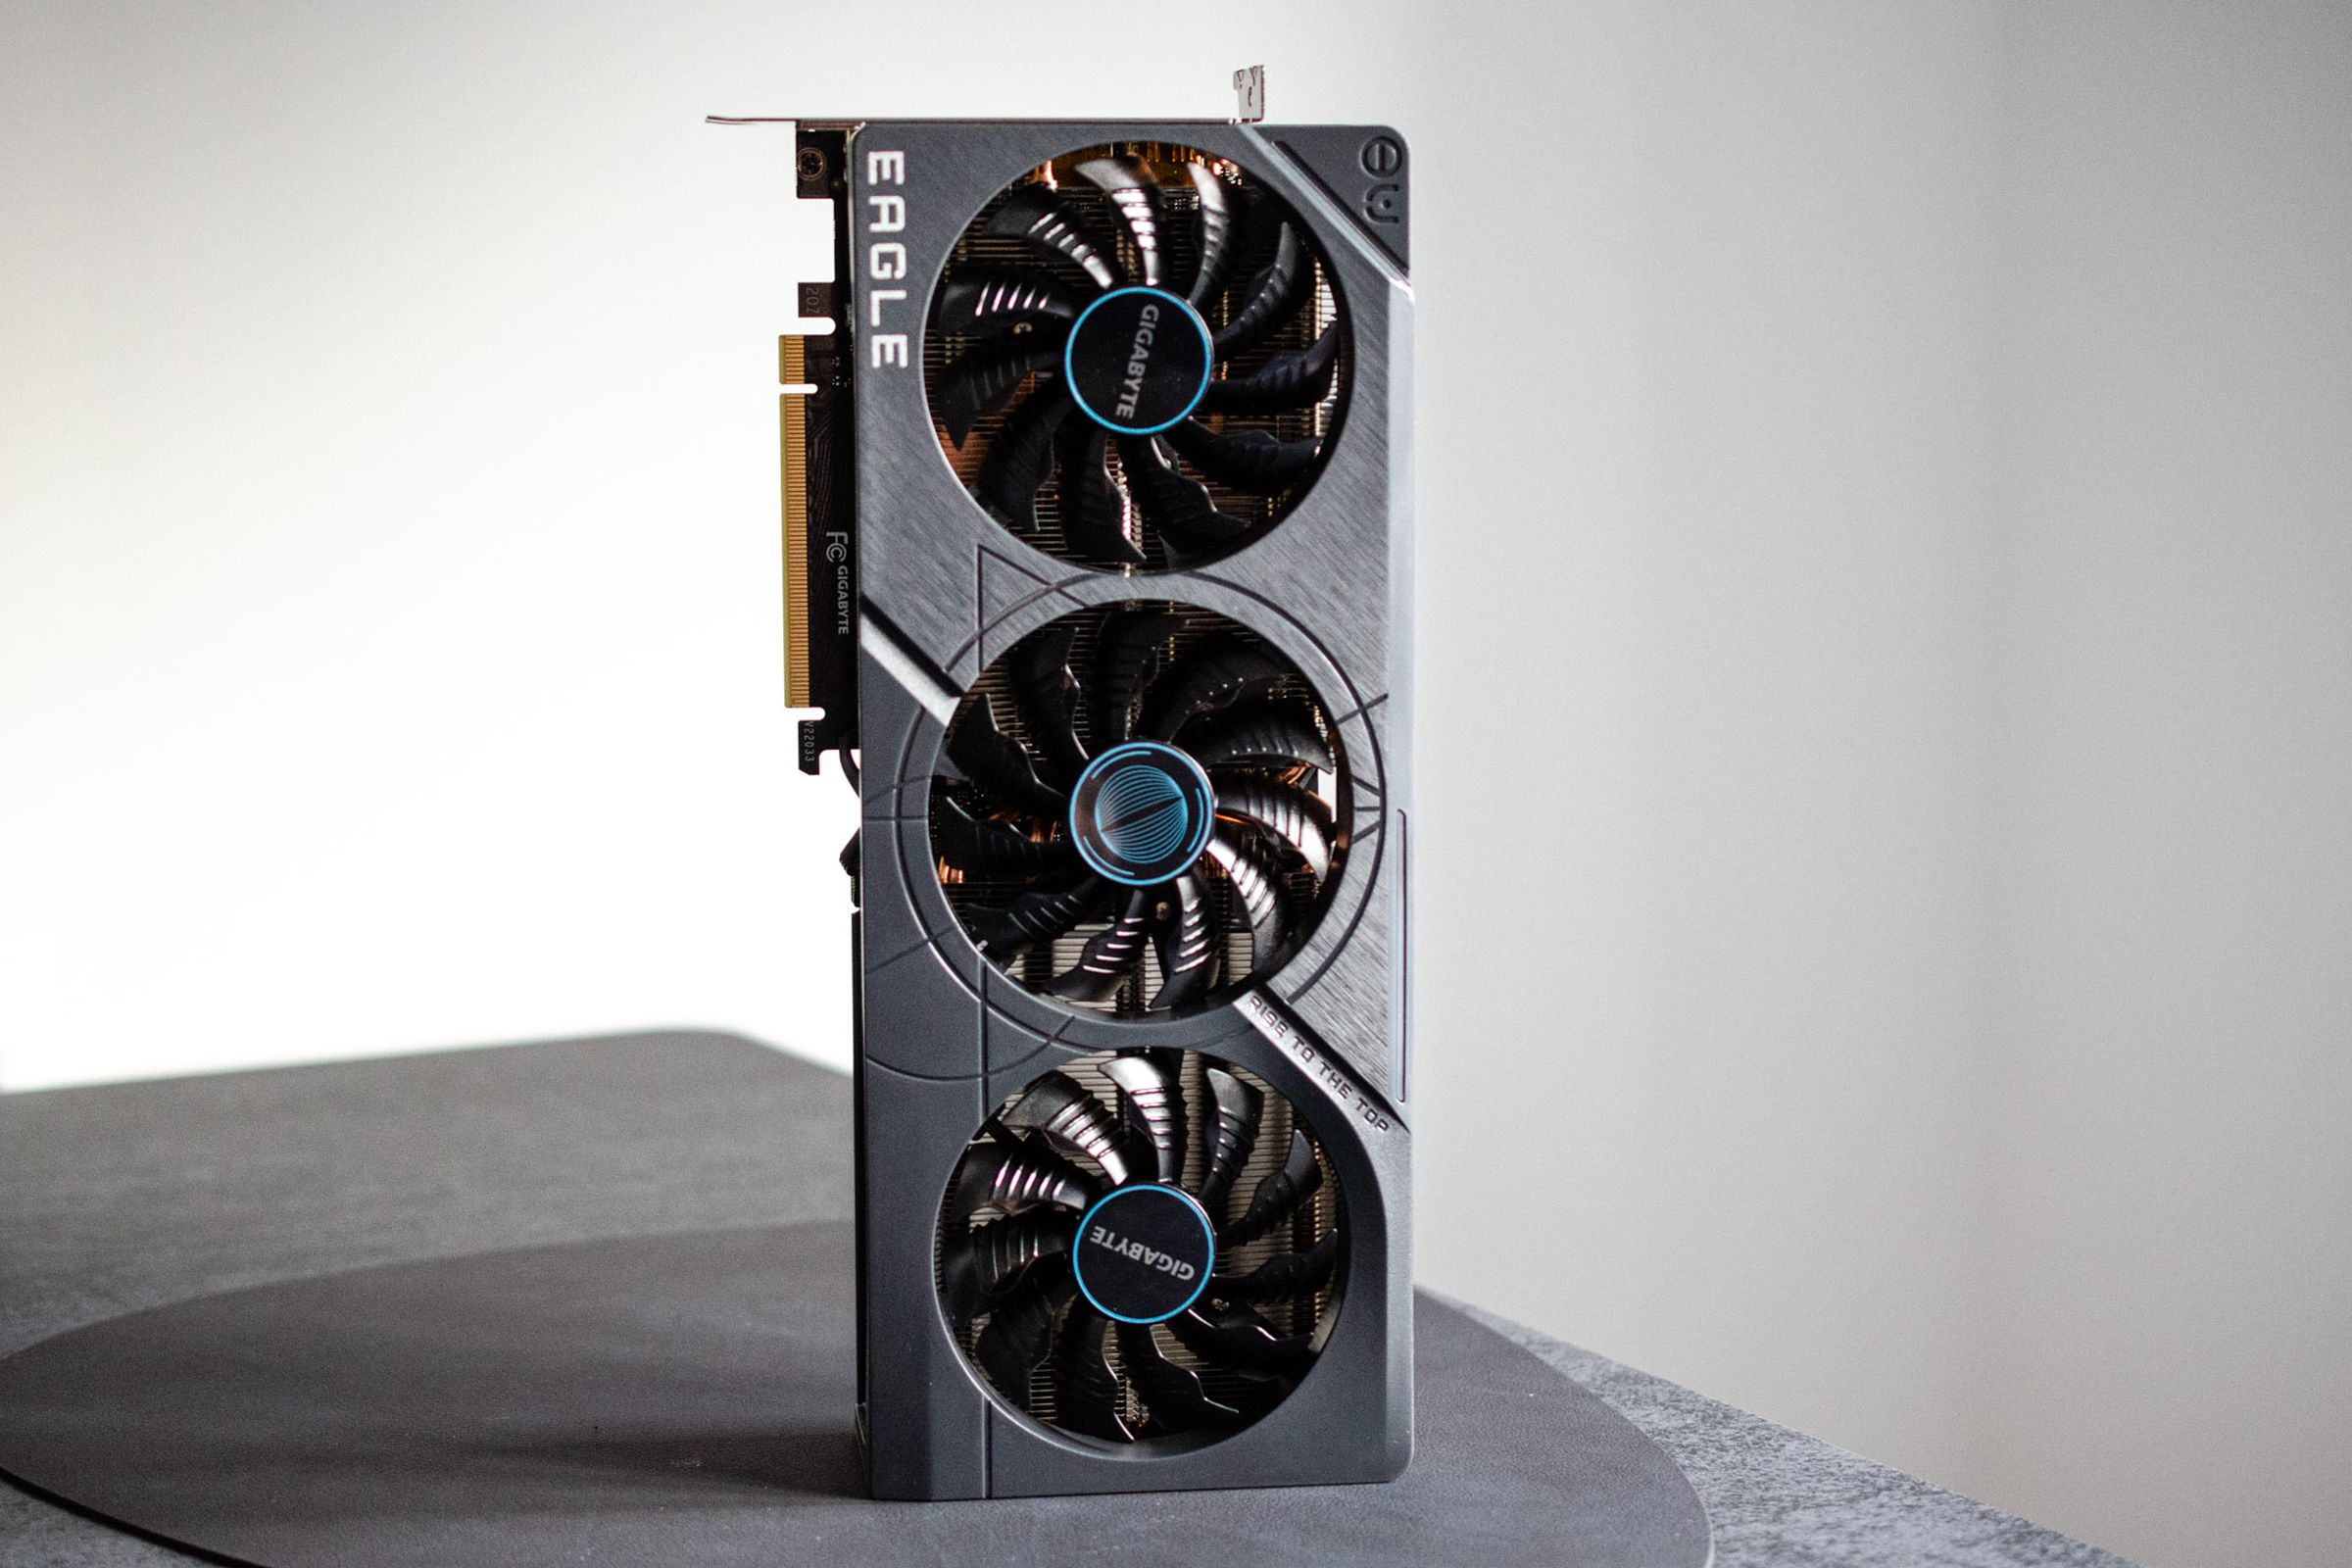 The Gigabyte RTX 4070 Ti standing vertically on a leather mat